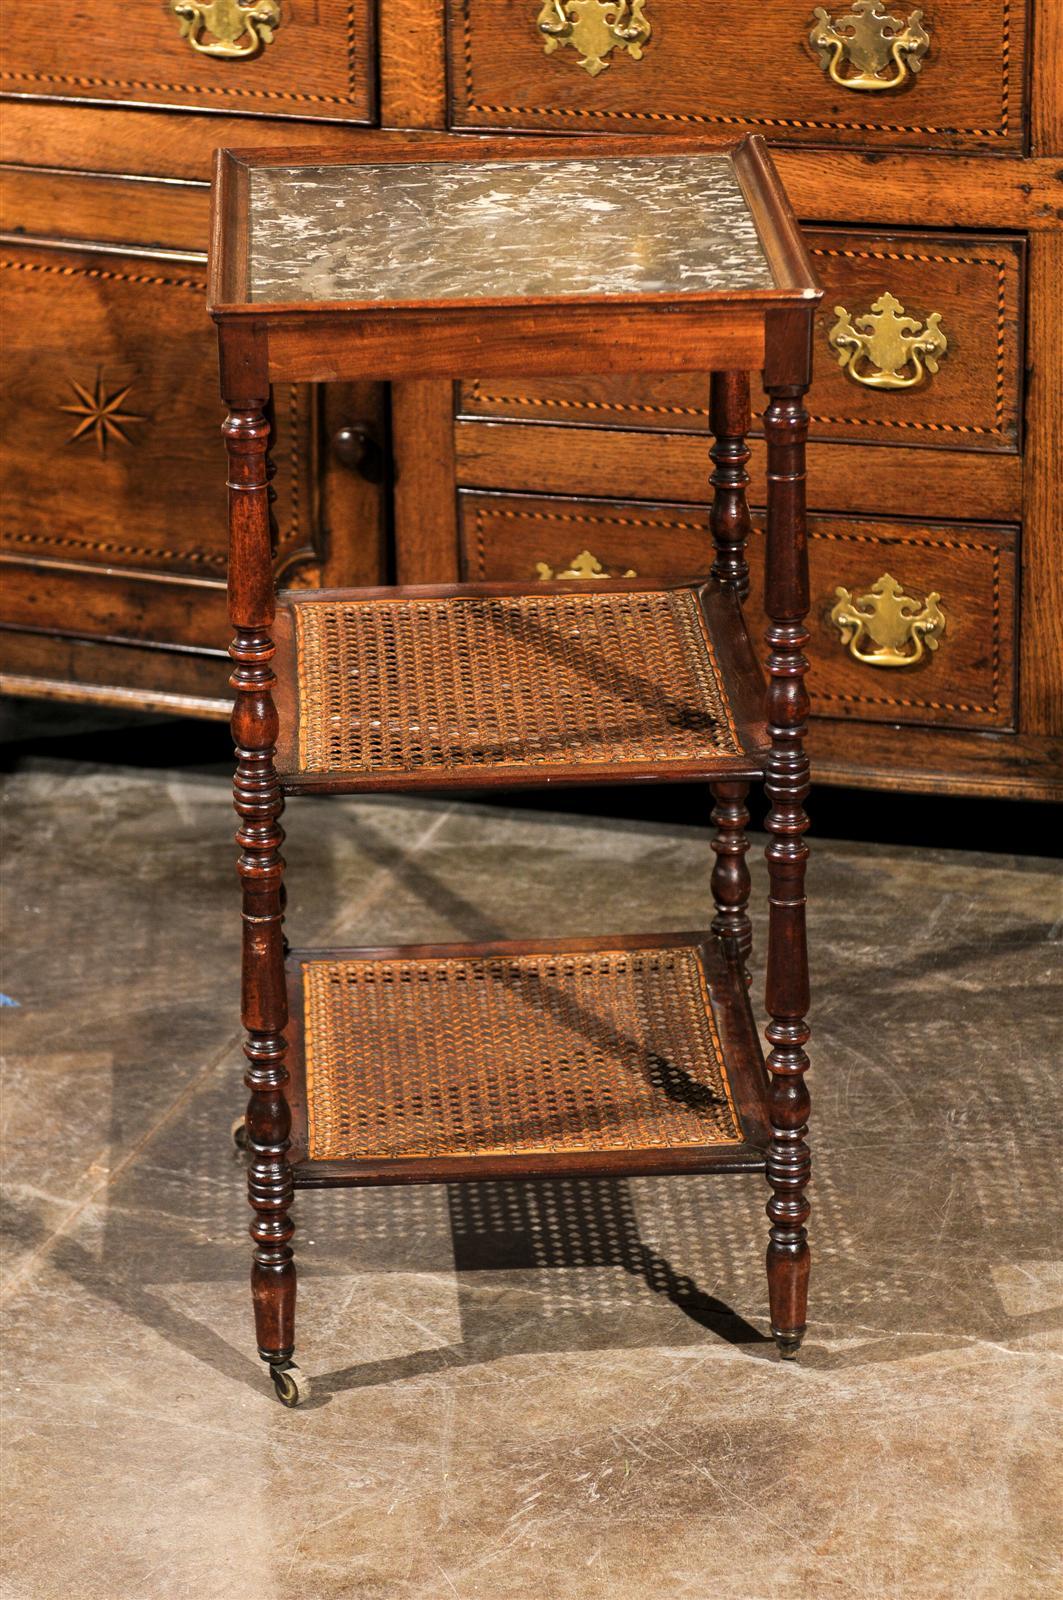 French Mid-19th Century Etagere or Trolley with Cane Shelves and Marble-Top 5